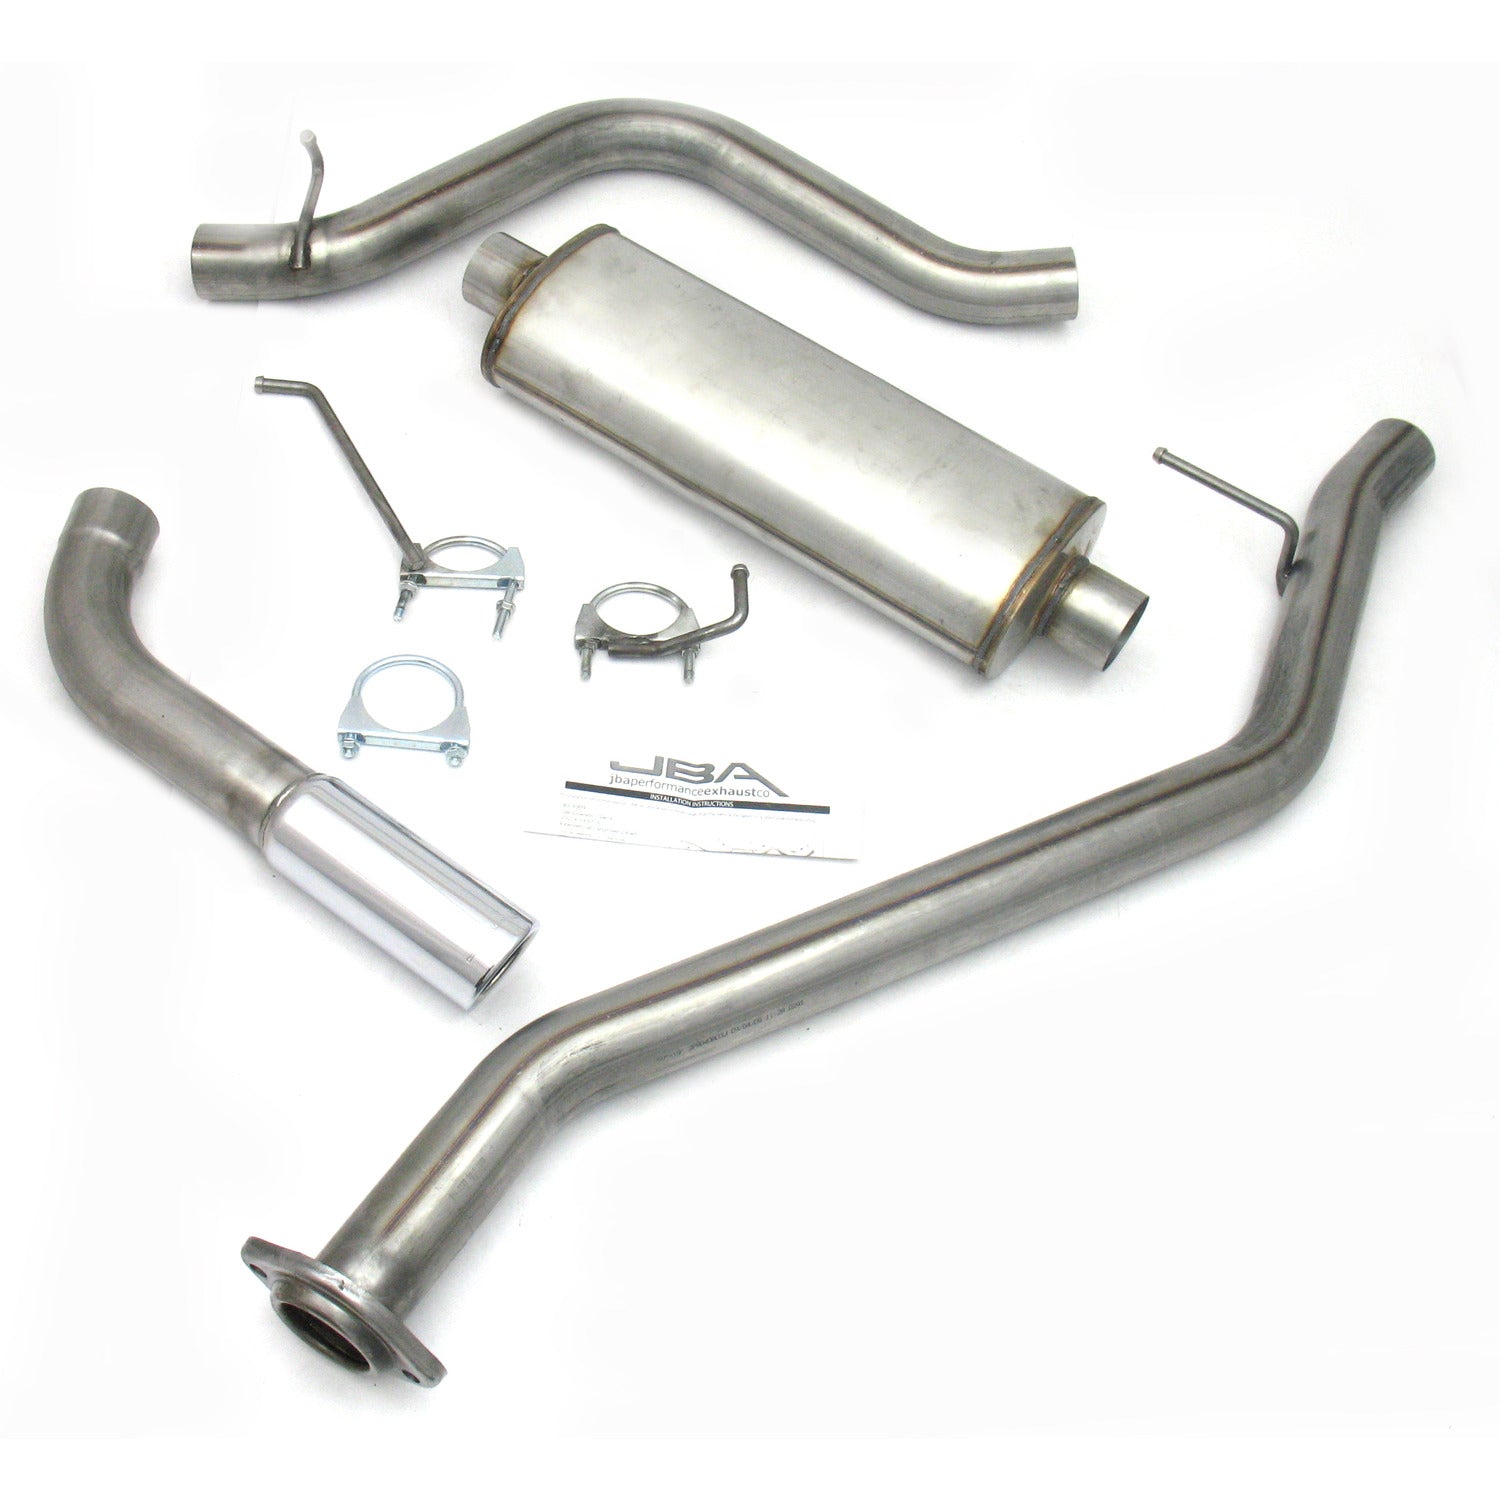 JBA Performance Exhaust 40-3009 3" Stainless Steel Exhaust System 99-06 GM Silverado Extended Cab Short Bed